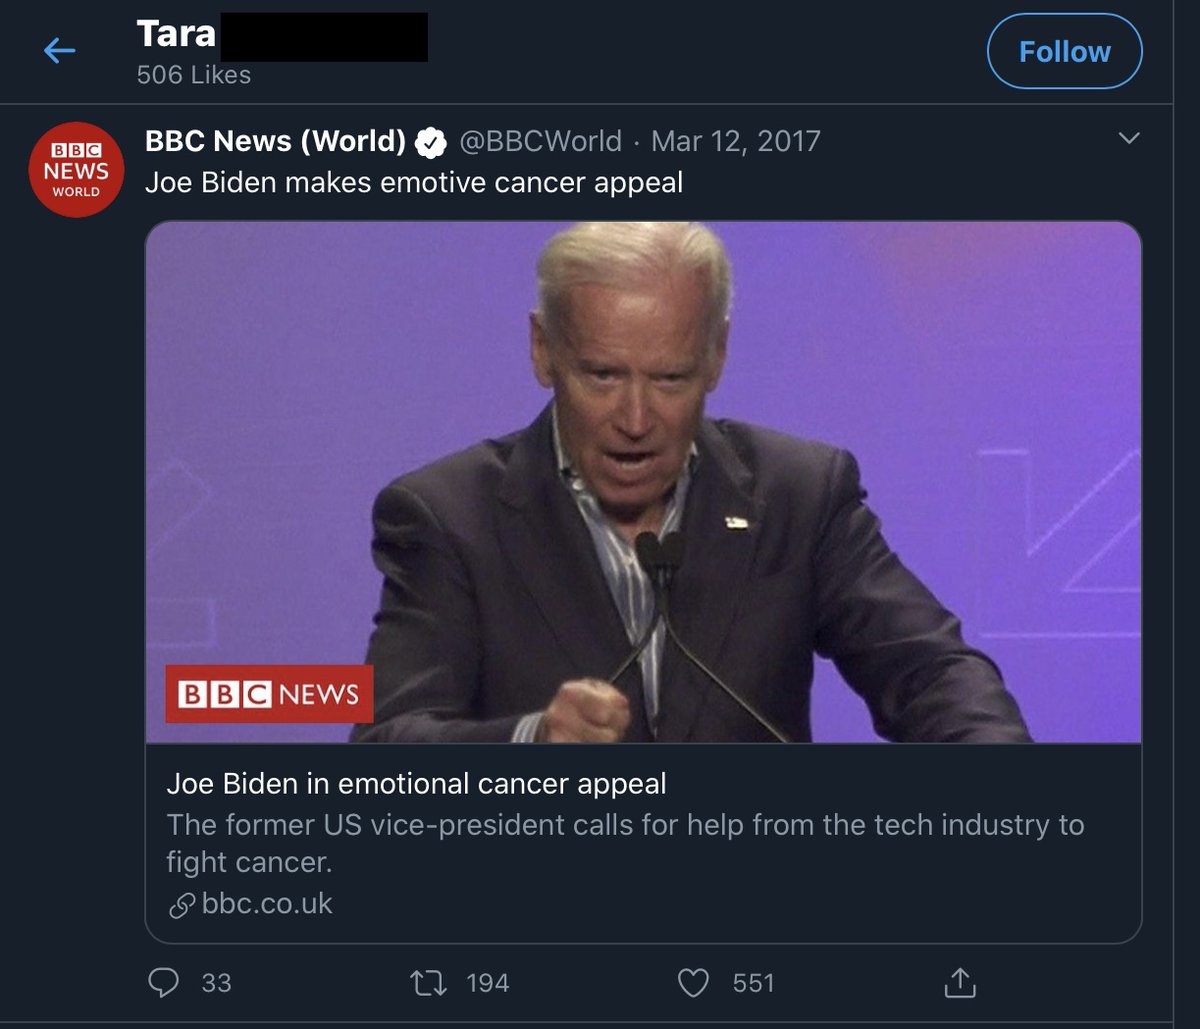 She also praised him for speaking out against cancer in a March 2017 tweet. She also retweeted a BBC article about Joe Biden making an emotion speech about cancer the same day.